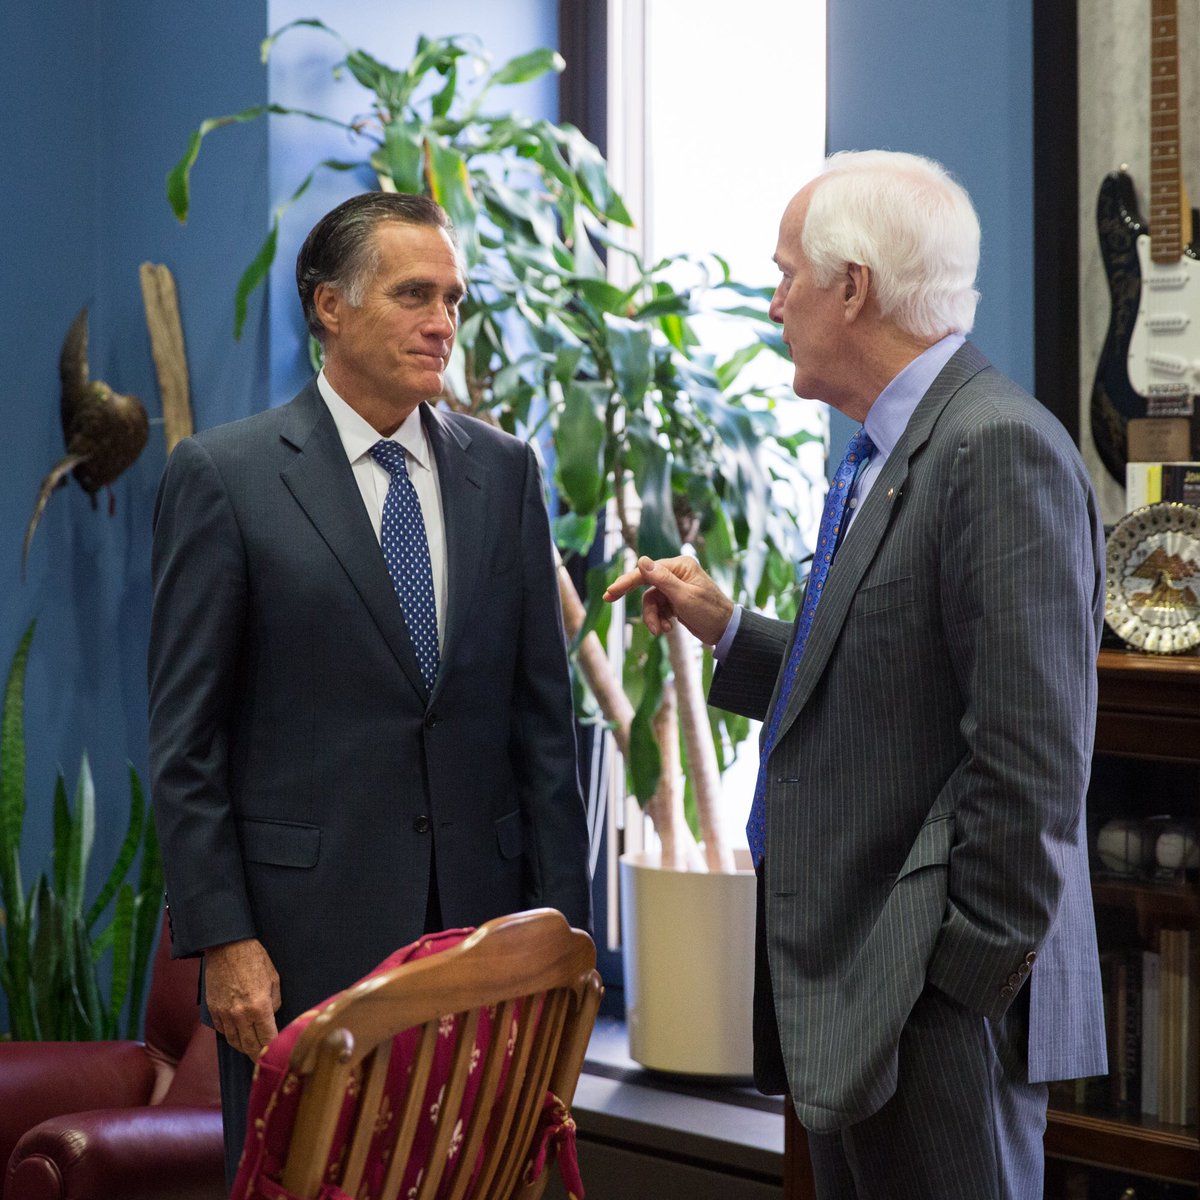 Great to catch up with Sen-Elect Romney. We will be a stronger Senate because of your service. ⁦@MittRomney⁩